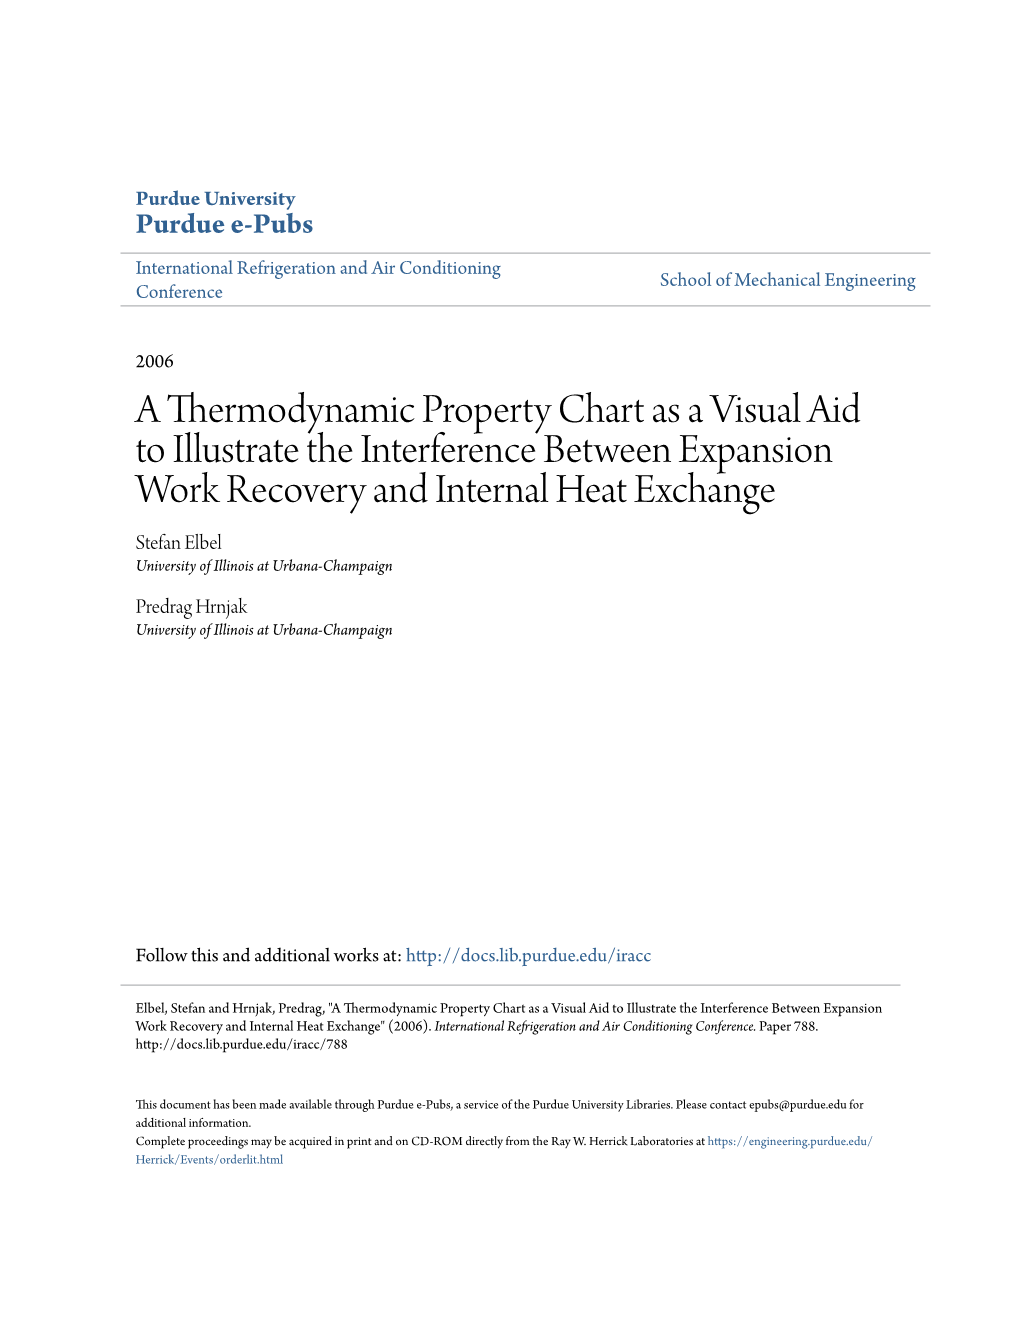 A Thermodynamic Property Chart As a Visual Aid to Illustrate The